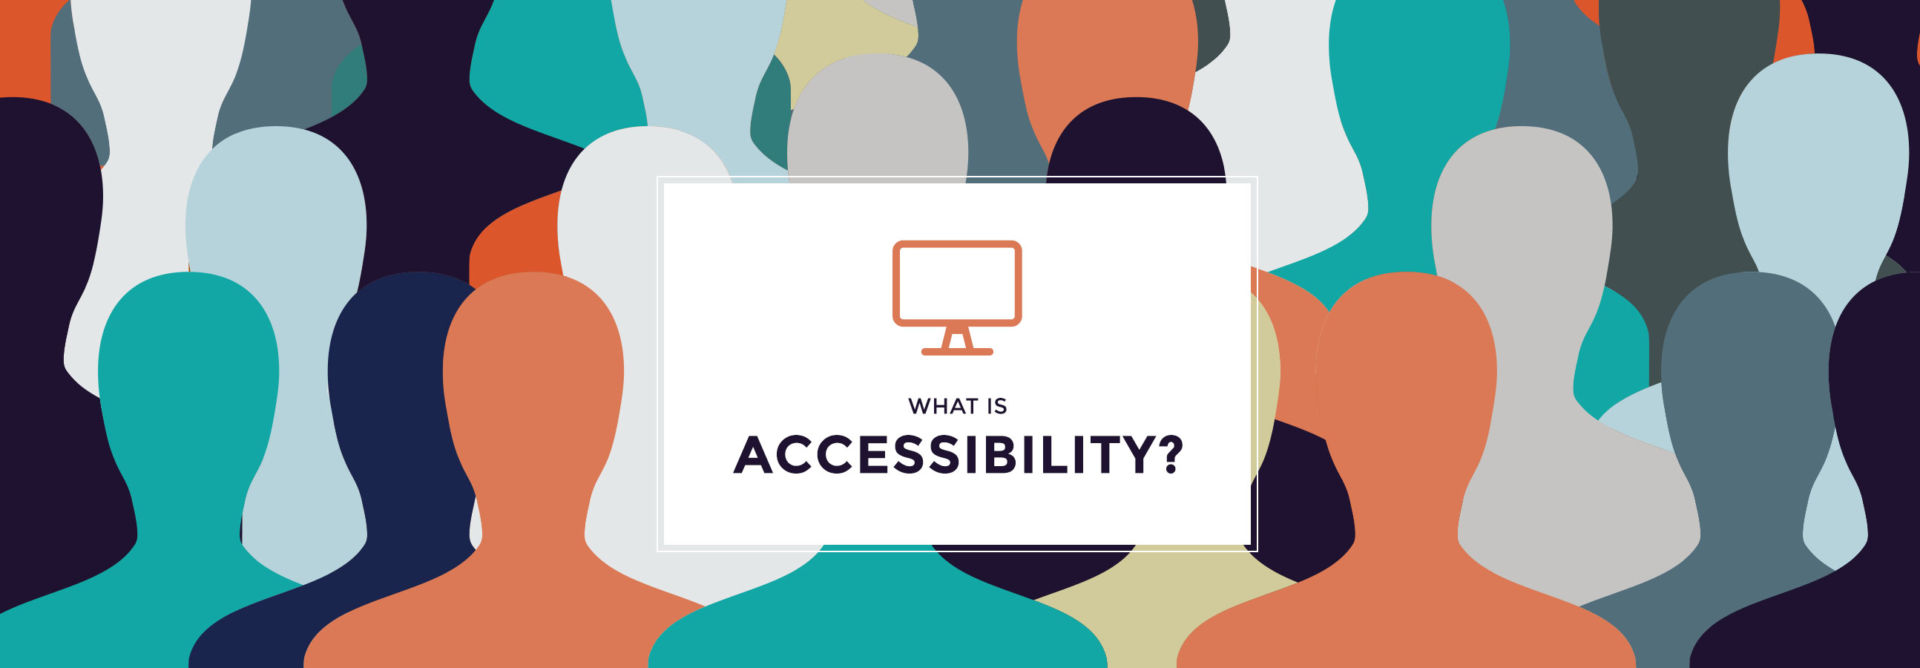 ADA Accessibility: Common Questions And Answers!